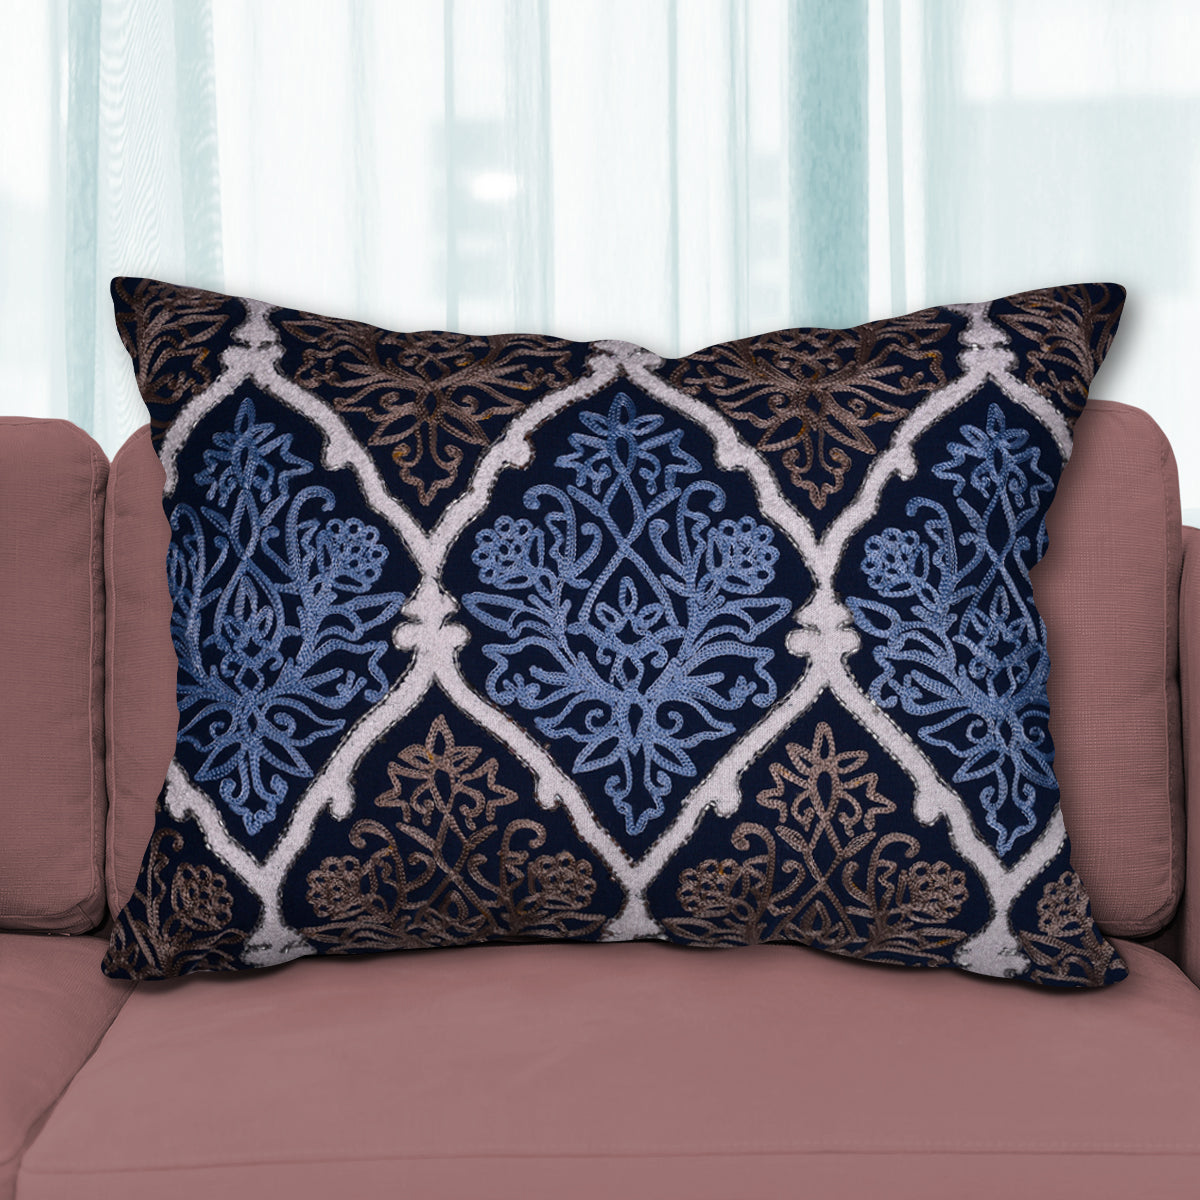 Decozen Blue Brown Throw Pillow Covers Embroidered 14 inchx20 inch, Set of 4, Size: 14 x 20